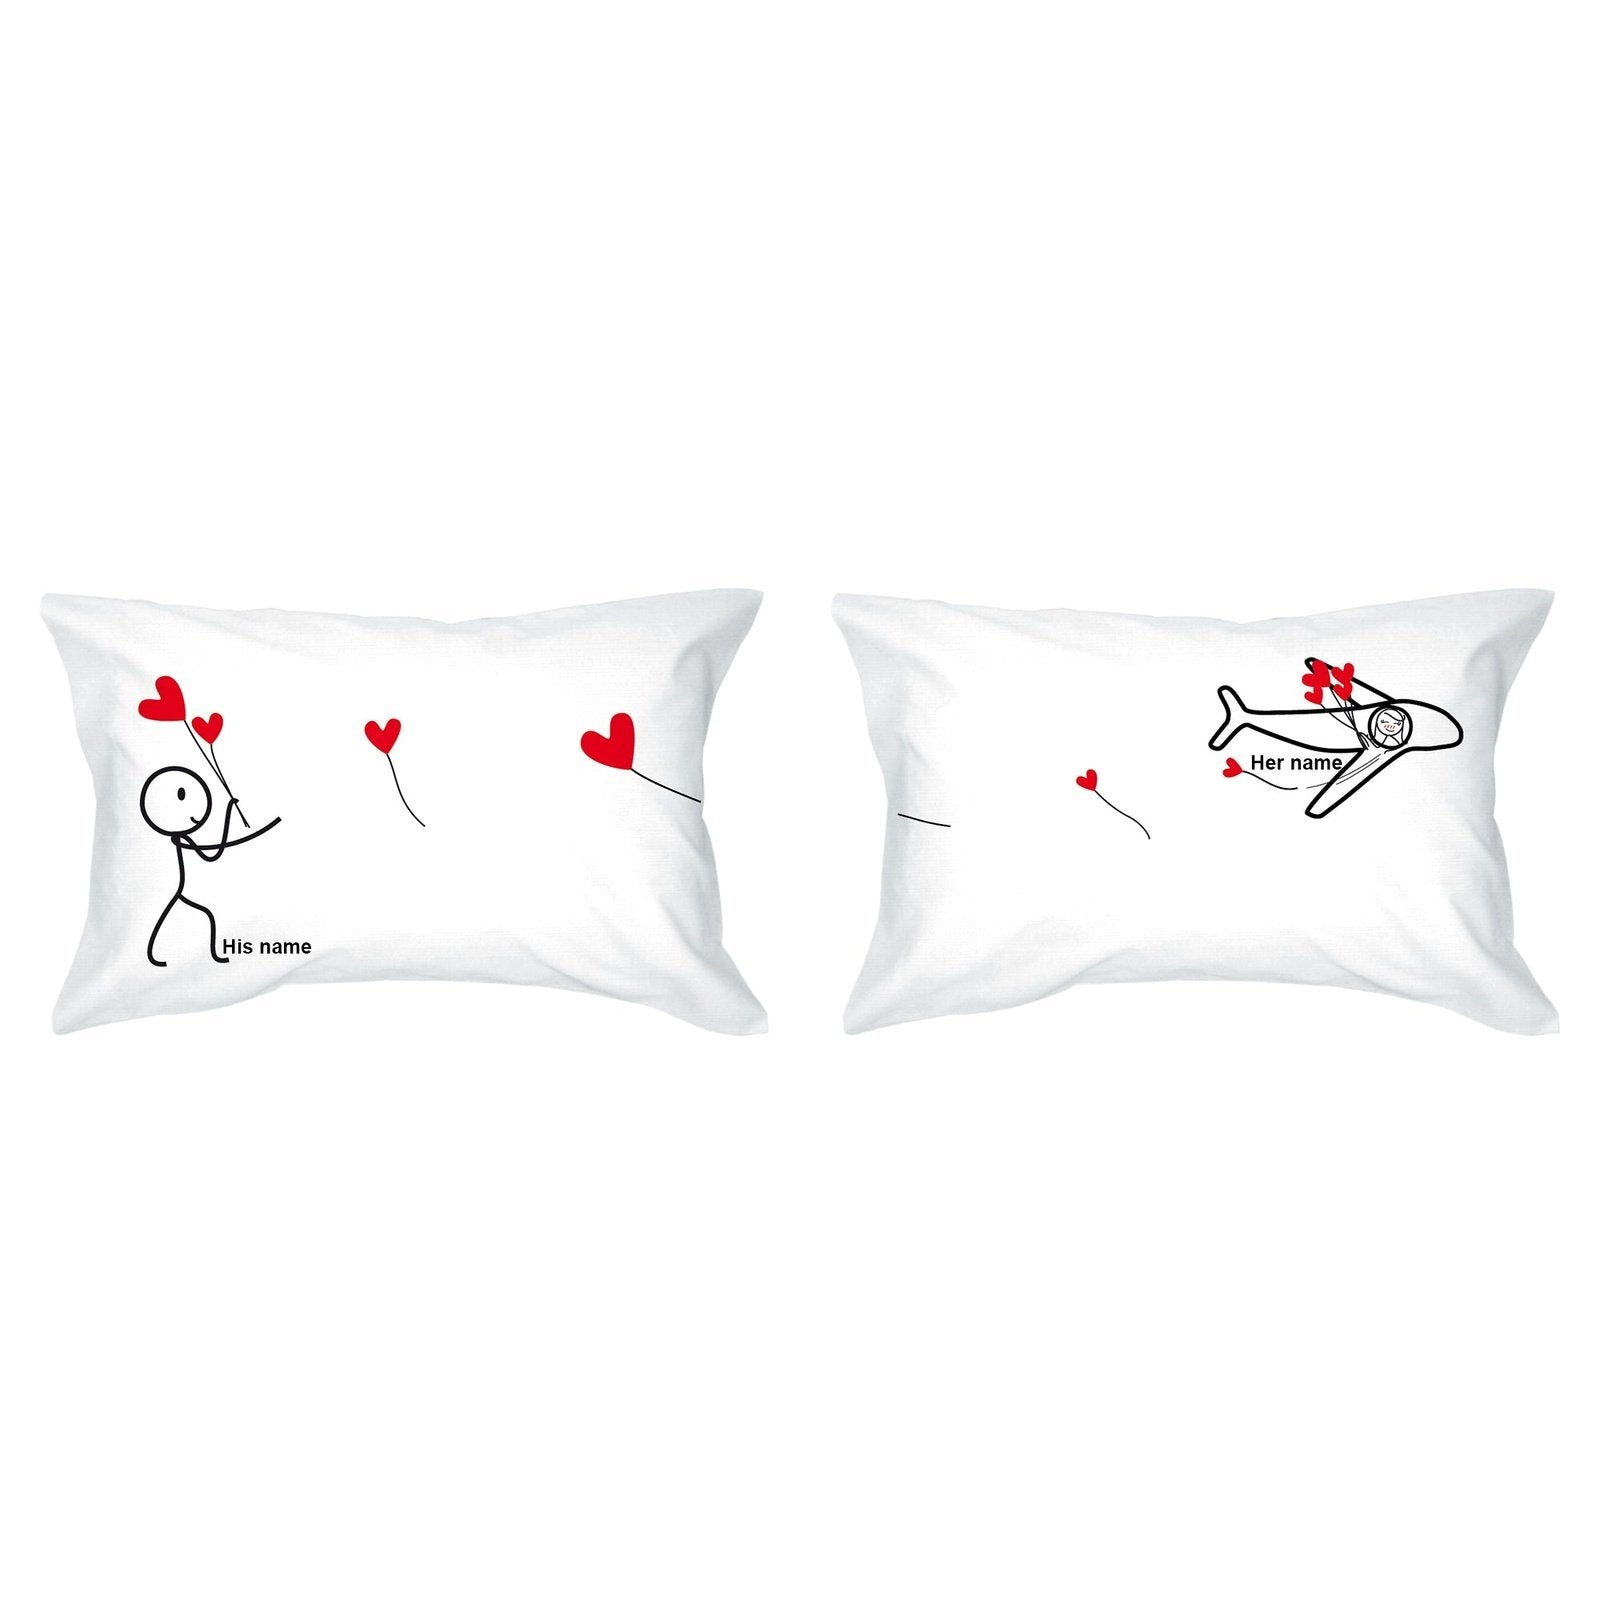 Add an artistic touch to any couples special occasion with these charming hand-drawn pillows.